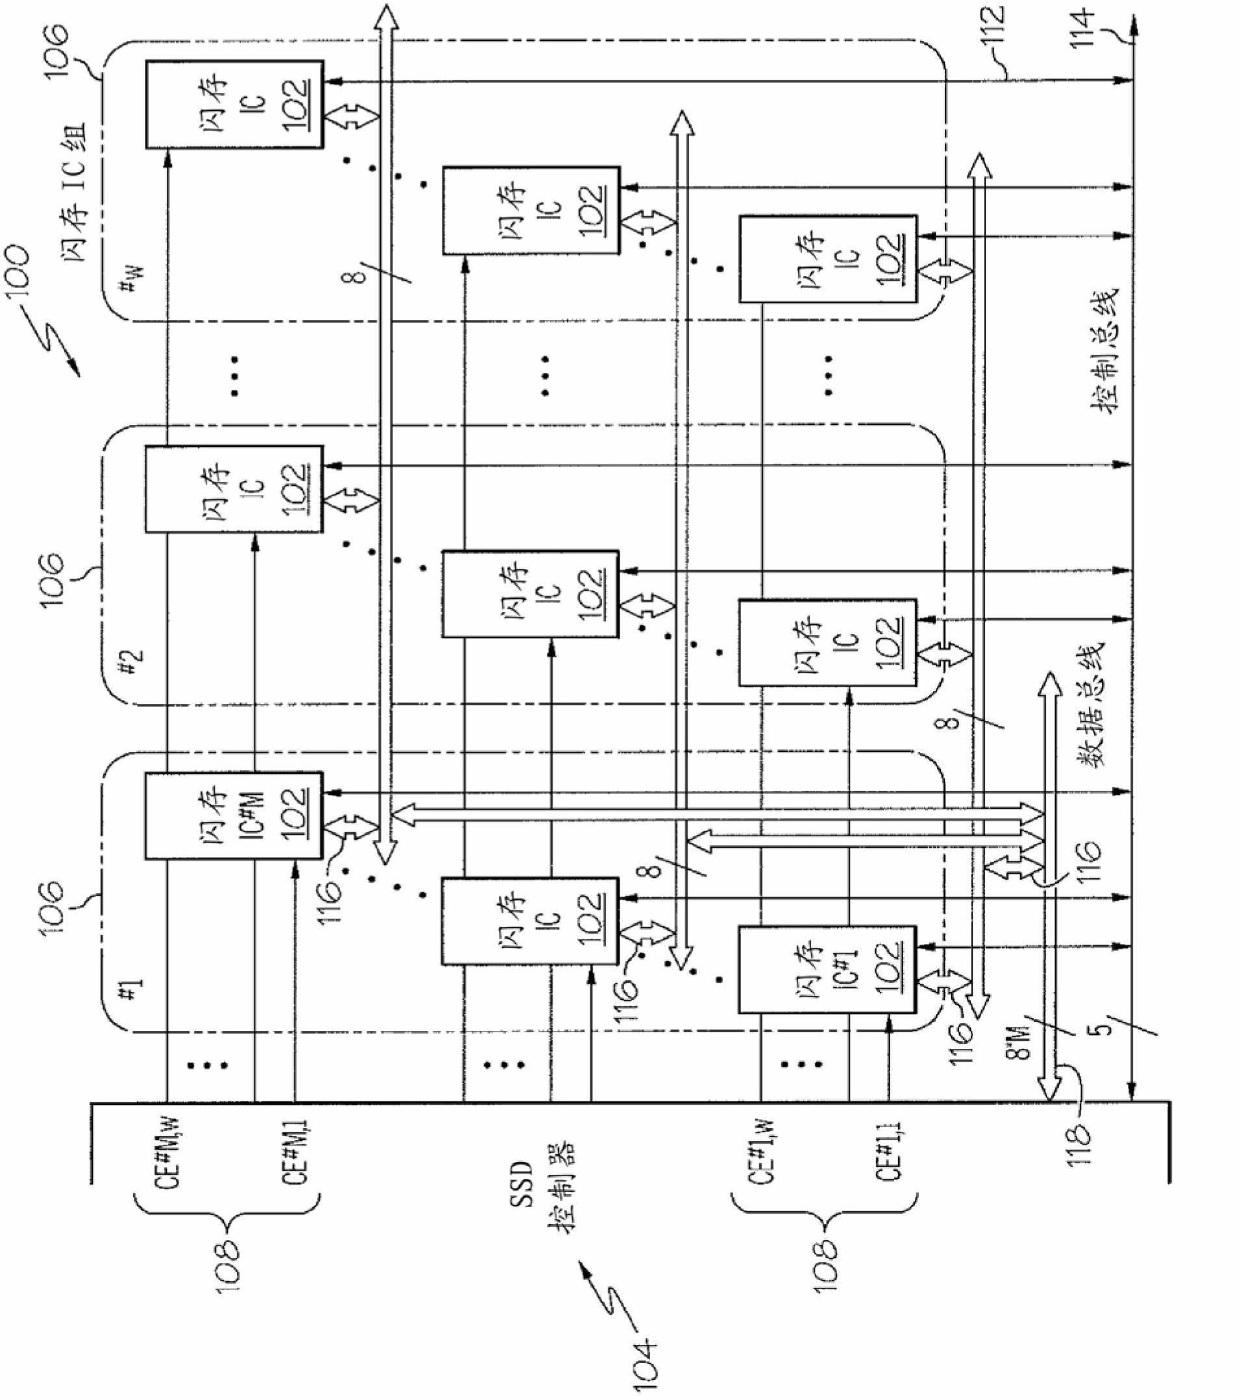 Solid-state storage system with parallel access of multiple flash/PCM devices